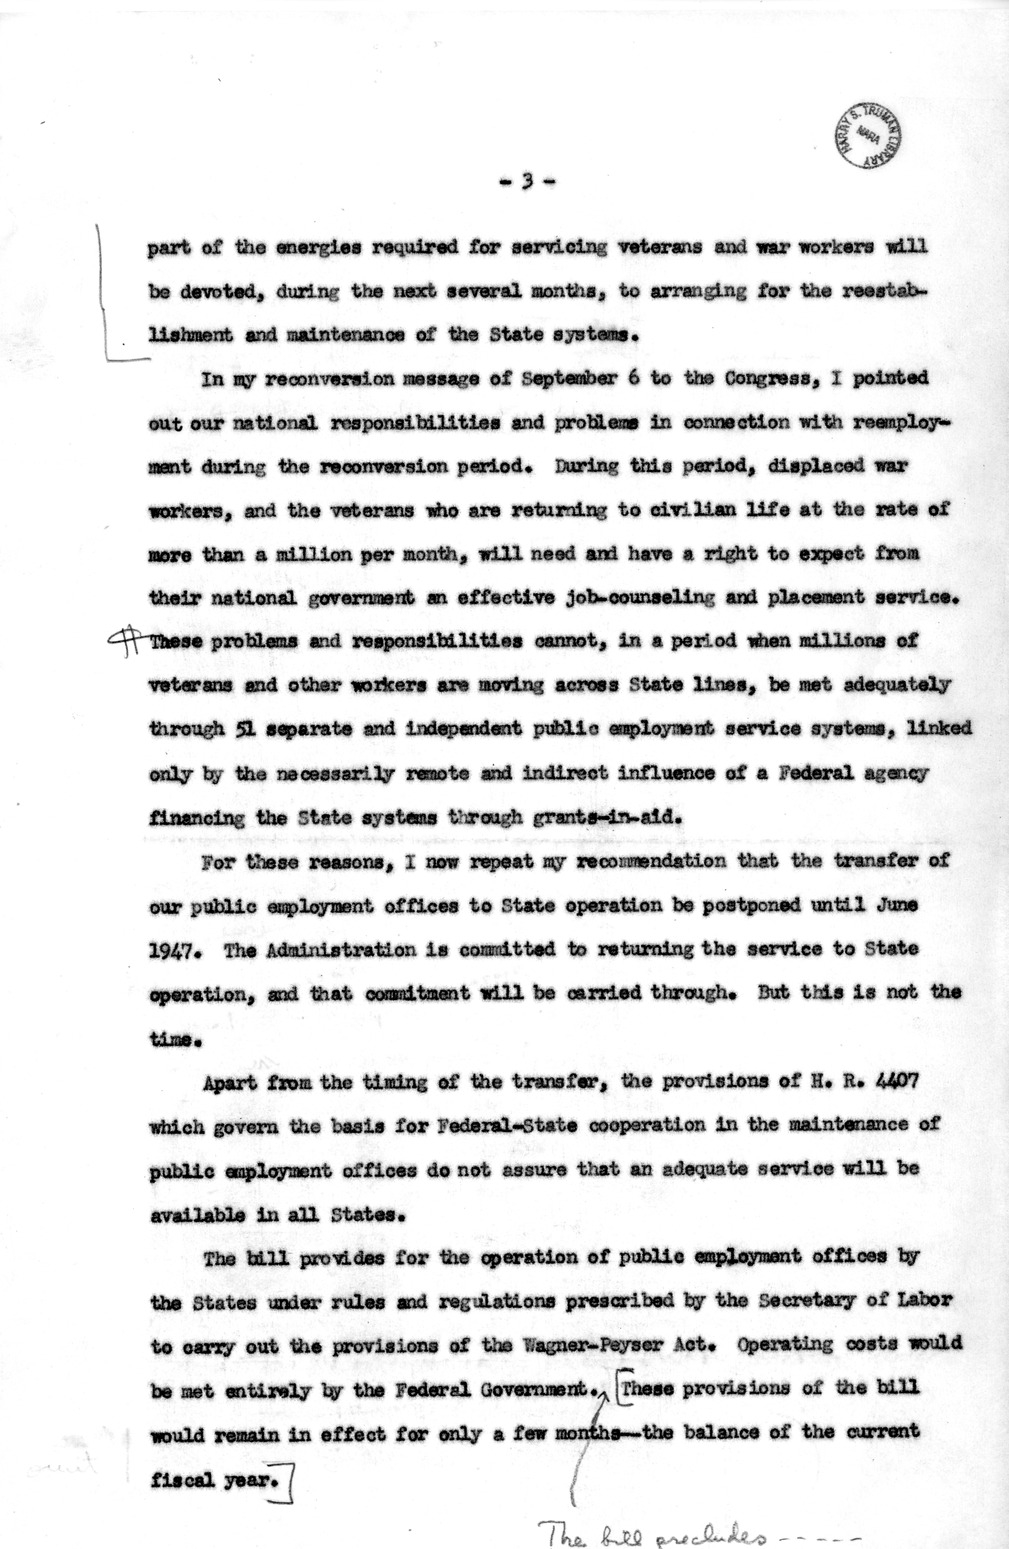 Memorandum from Harold D. Smith to M. C. Latta, H.R. 4407, Reducing Certain Appropriations and Contract Authorizations Available for the Fiscal Year 1946, with Attachments